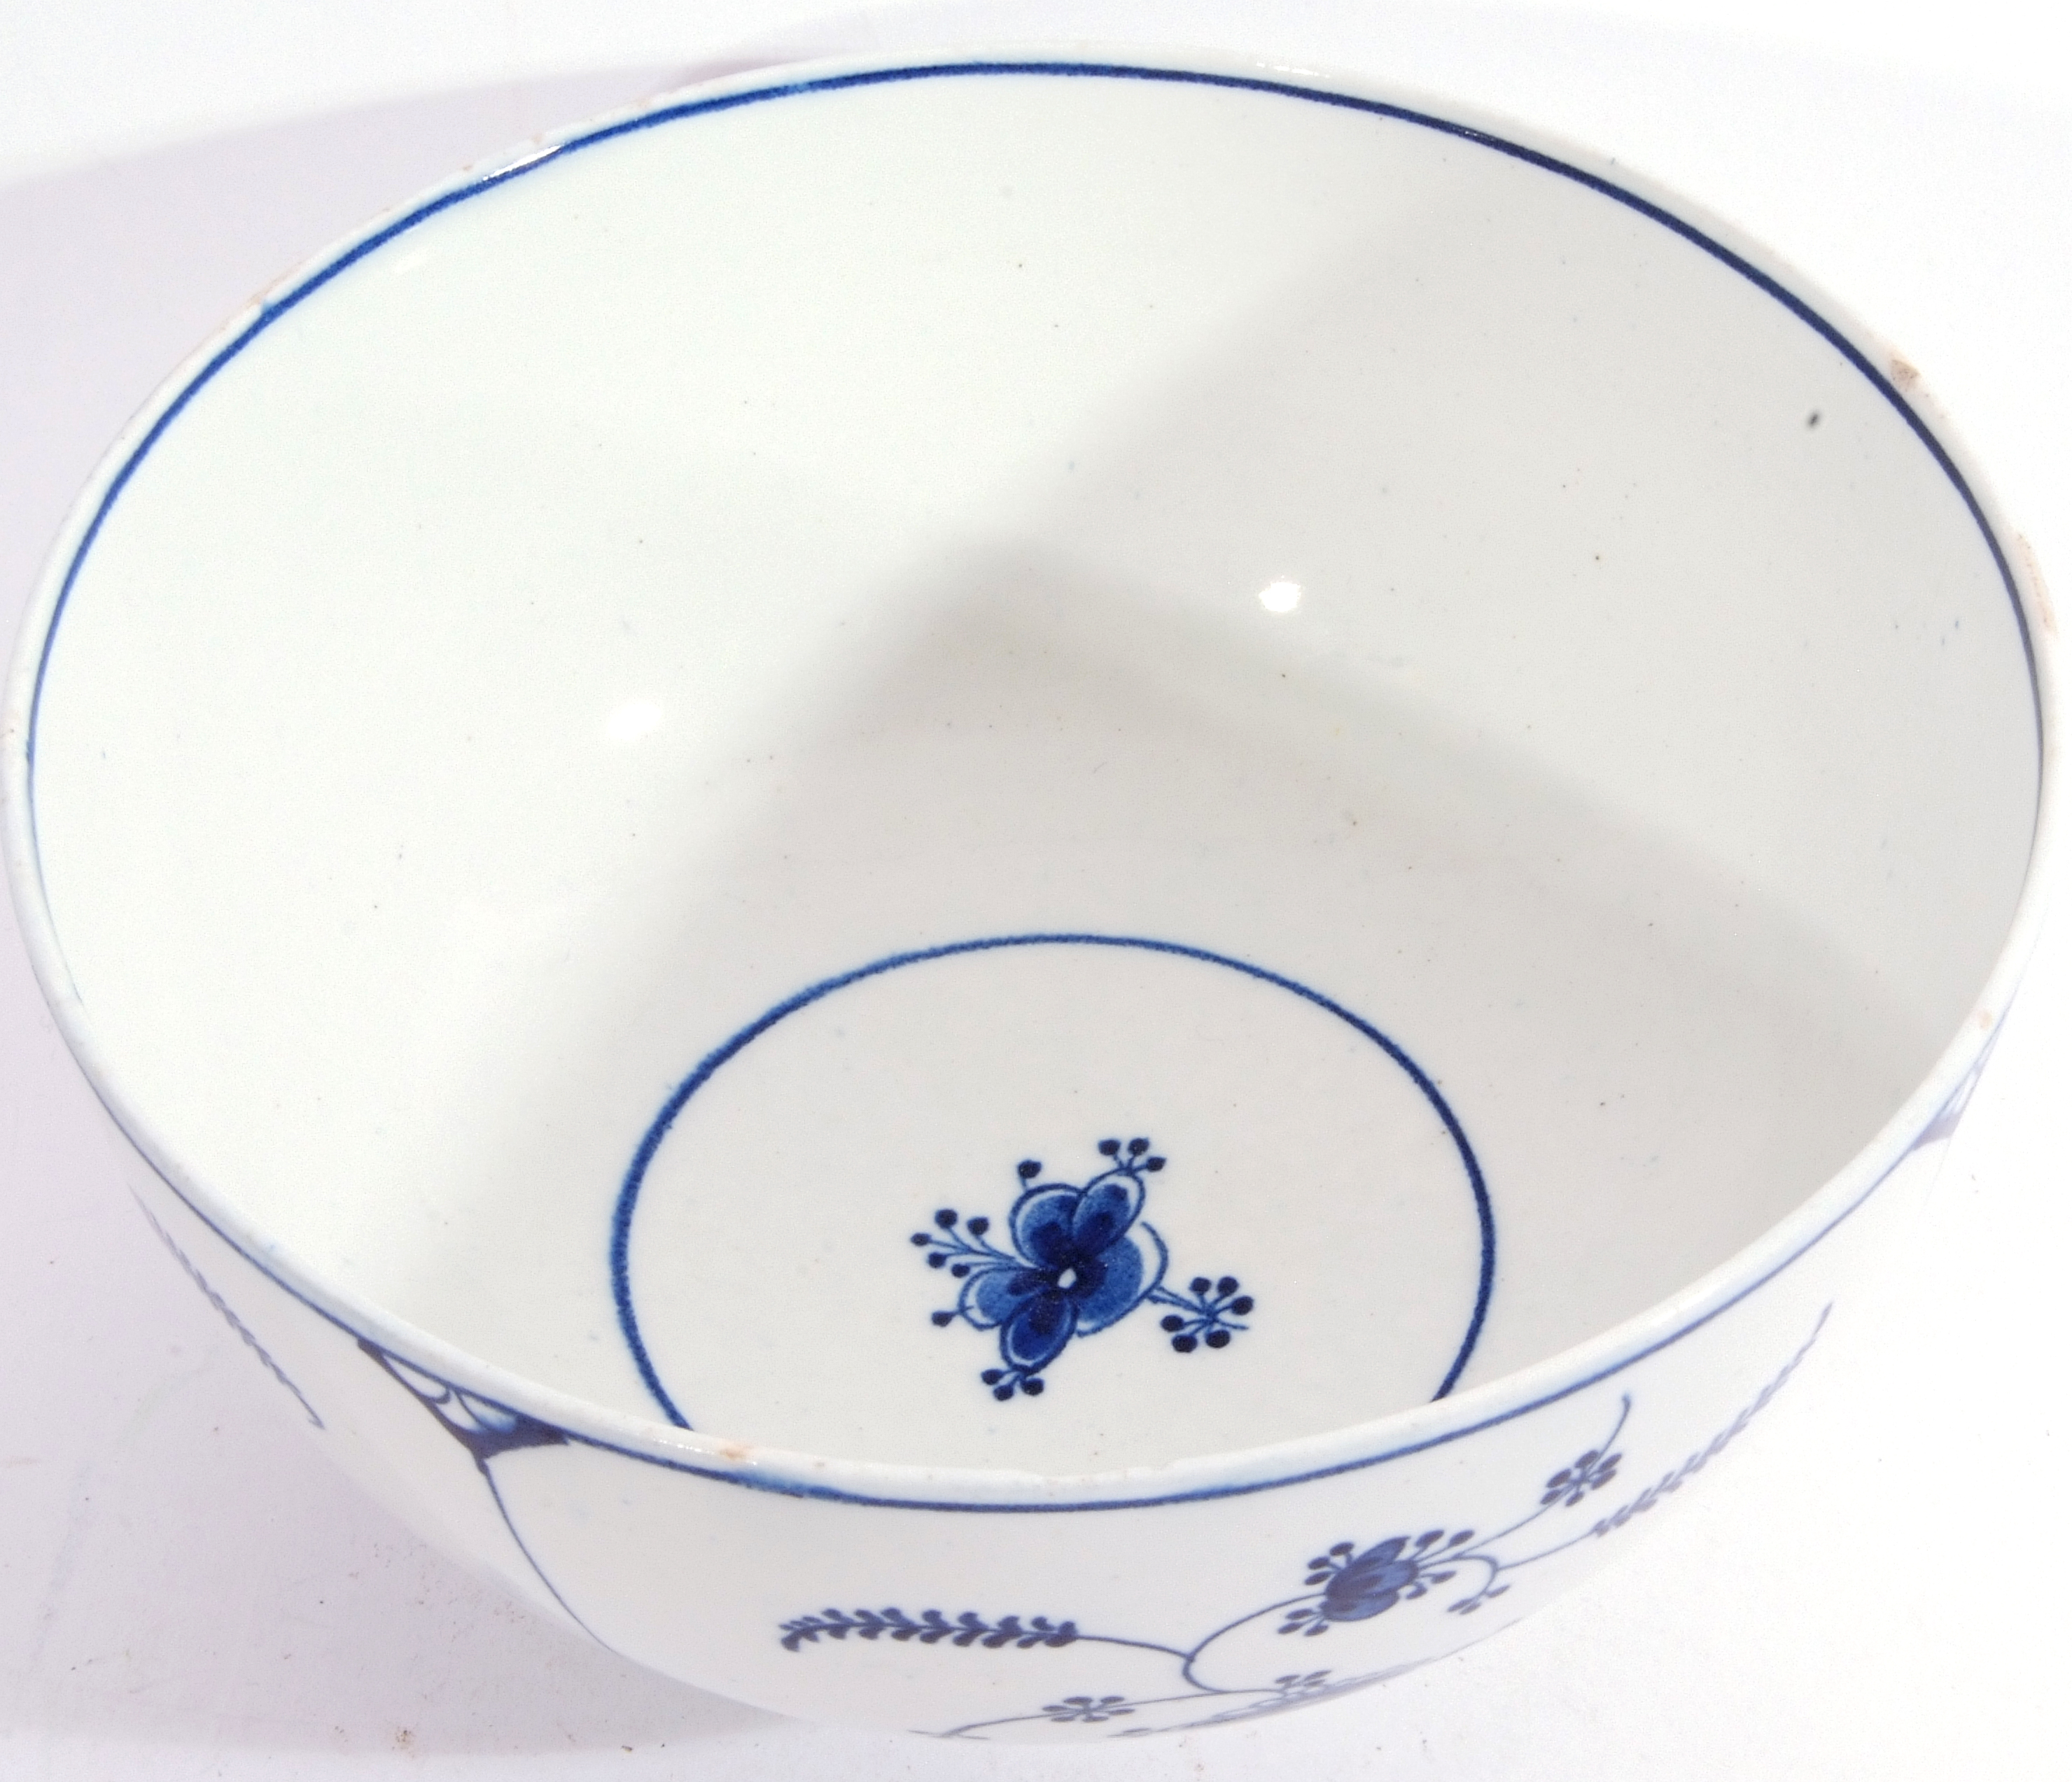 Lowestoft porcelain bowl decorated in bright tones of blue with the Meissen Immortelle pattern, - Image 6 of 7